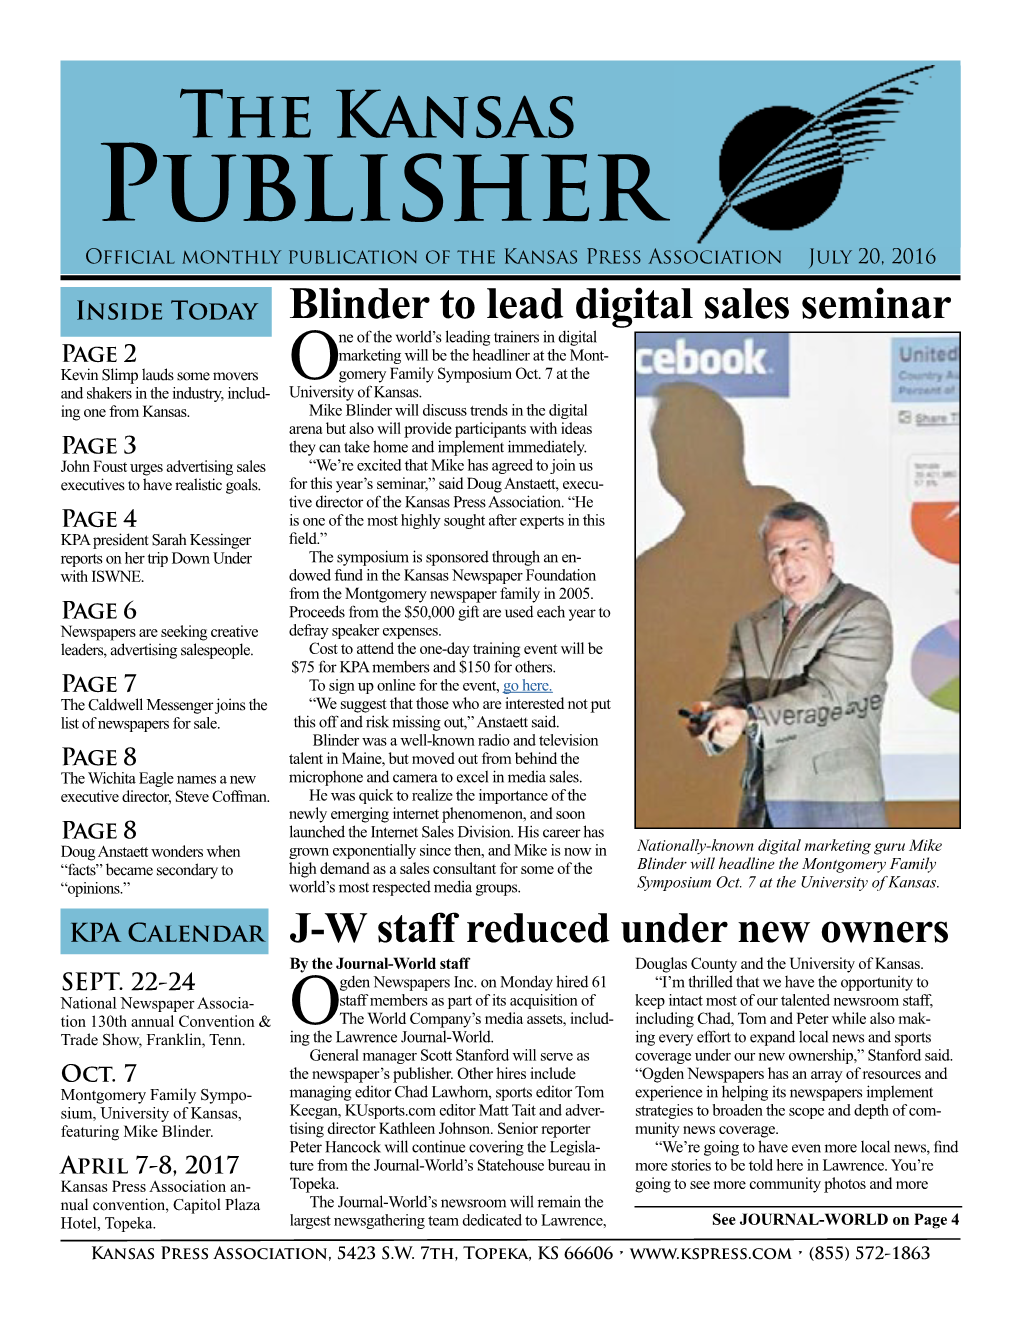 Publisher Official Monthly Publication of the Kansas Press Association July 20, 2016